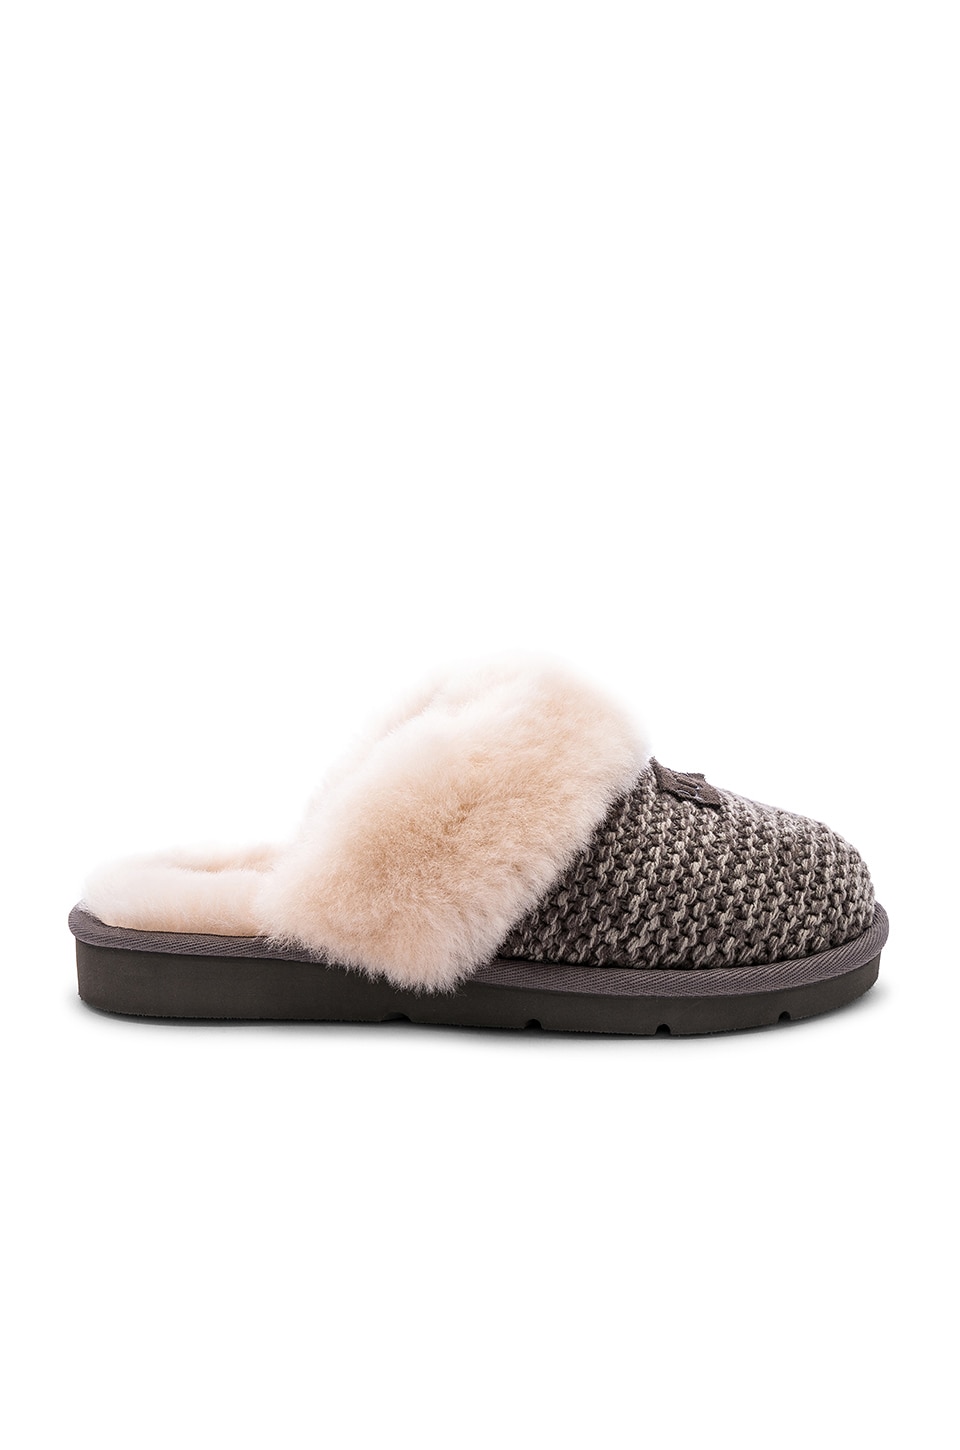 ugg cozy knit slippers charcoal